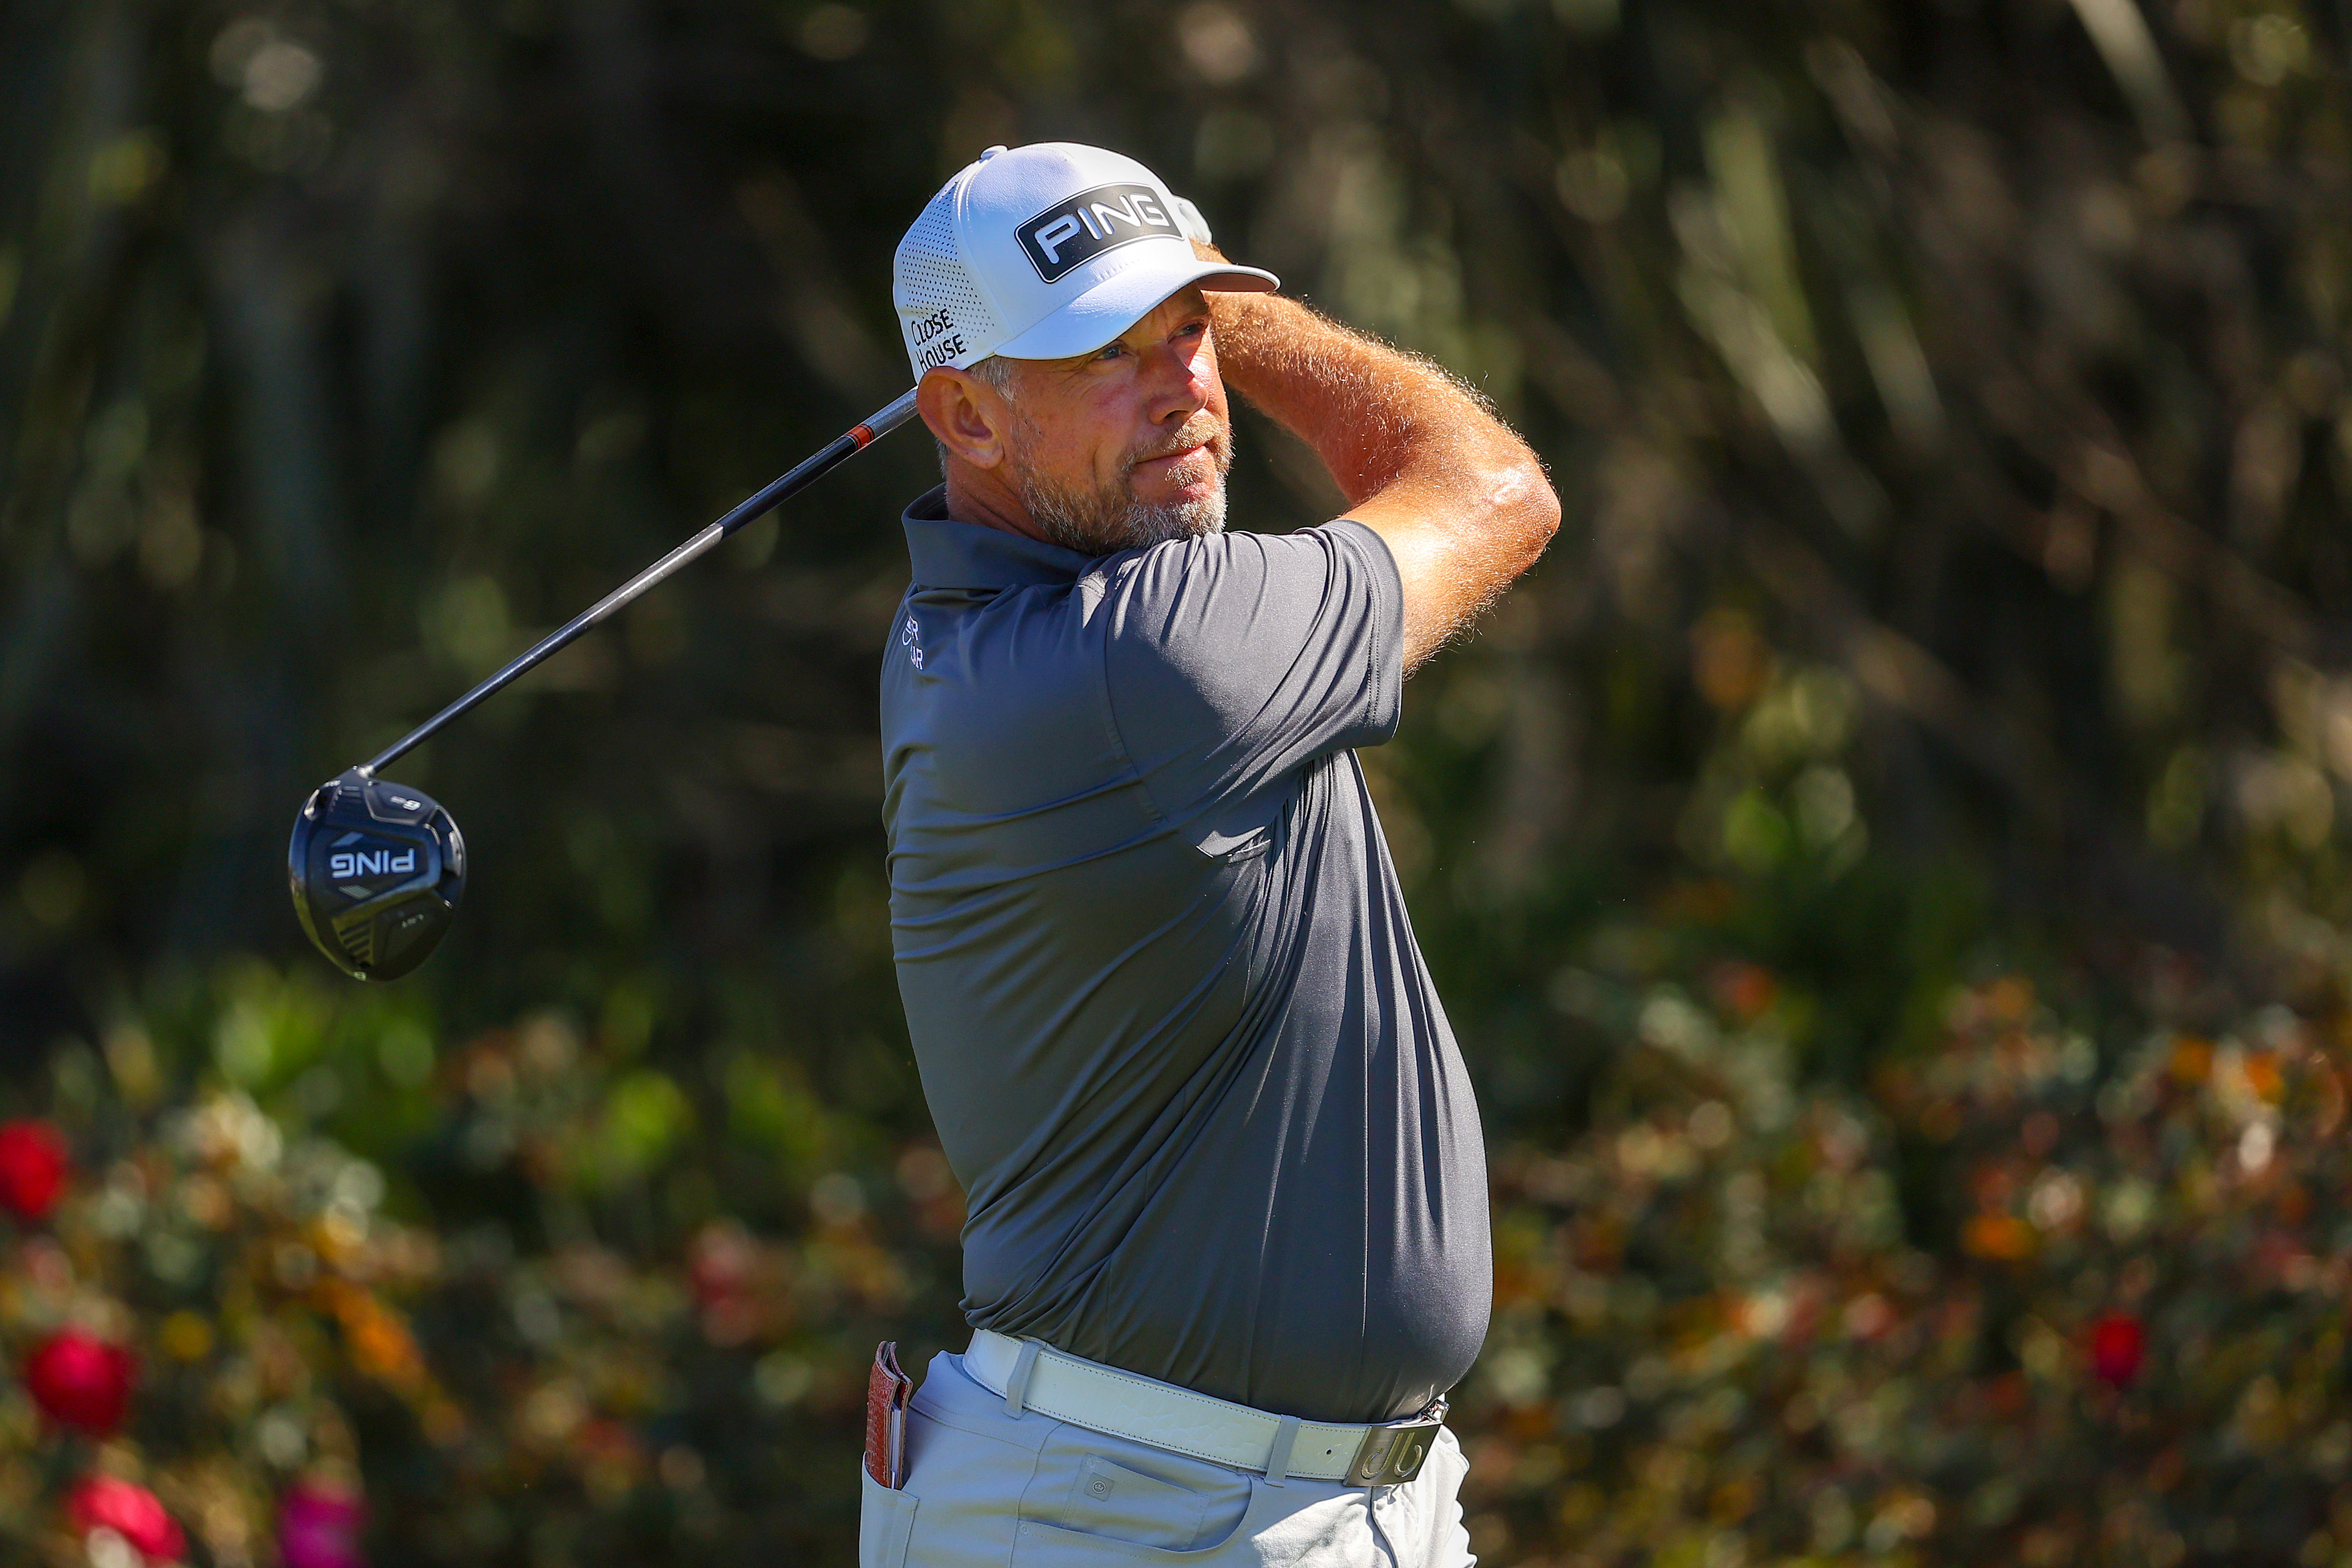 Players 2021 live updates Lee Westwood takes the lead on Day 2 at TPC Sawgrass Golf News and Tour Information Golf Digest